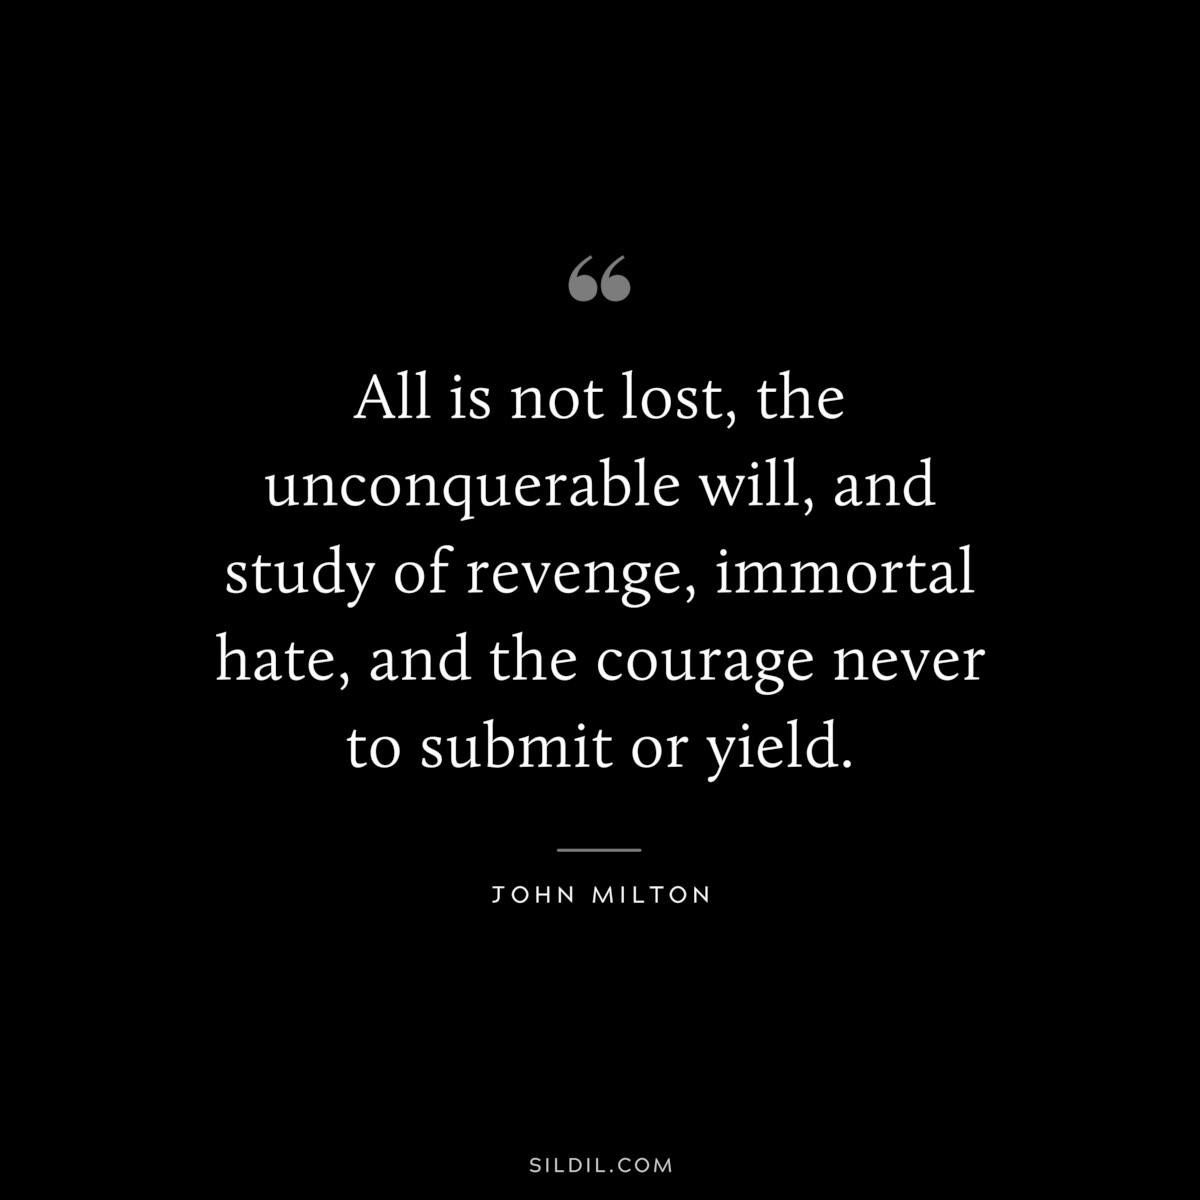 All is not lost, the unconquerable will, and study of revenge, immortal hate, and the courage never to submit or yield. ― John Milton